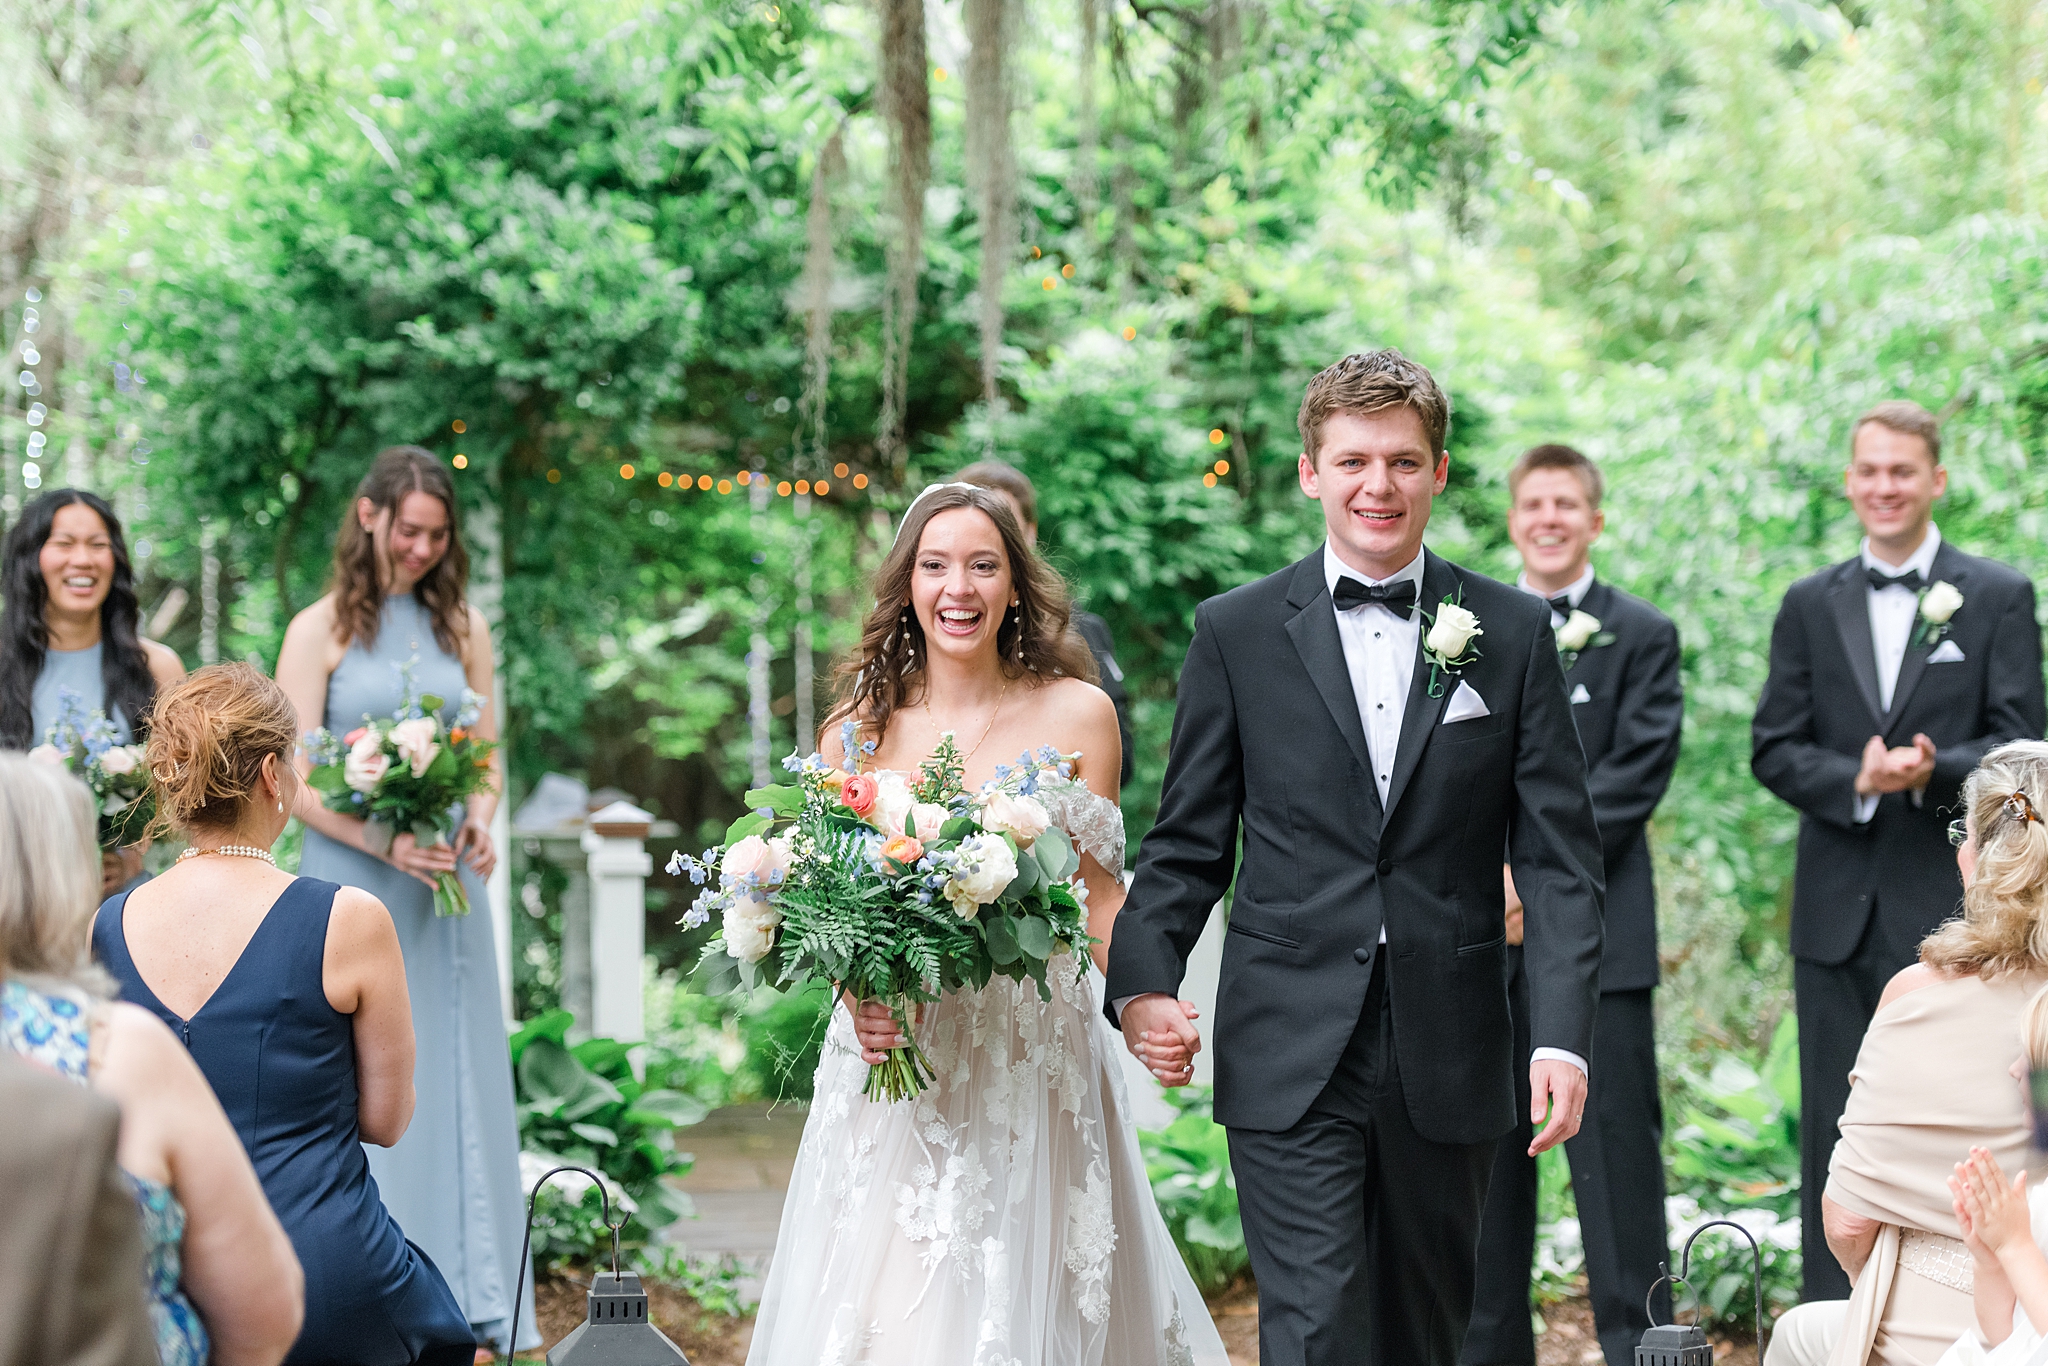 newlyweds walking down the aisle after their outdoor cermeony